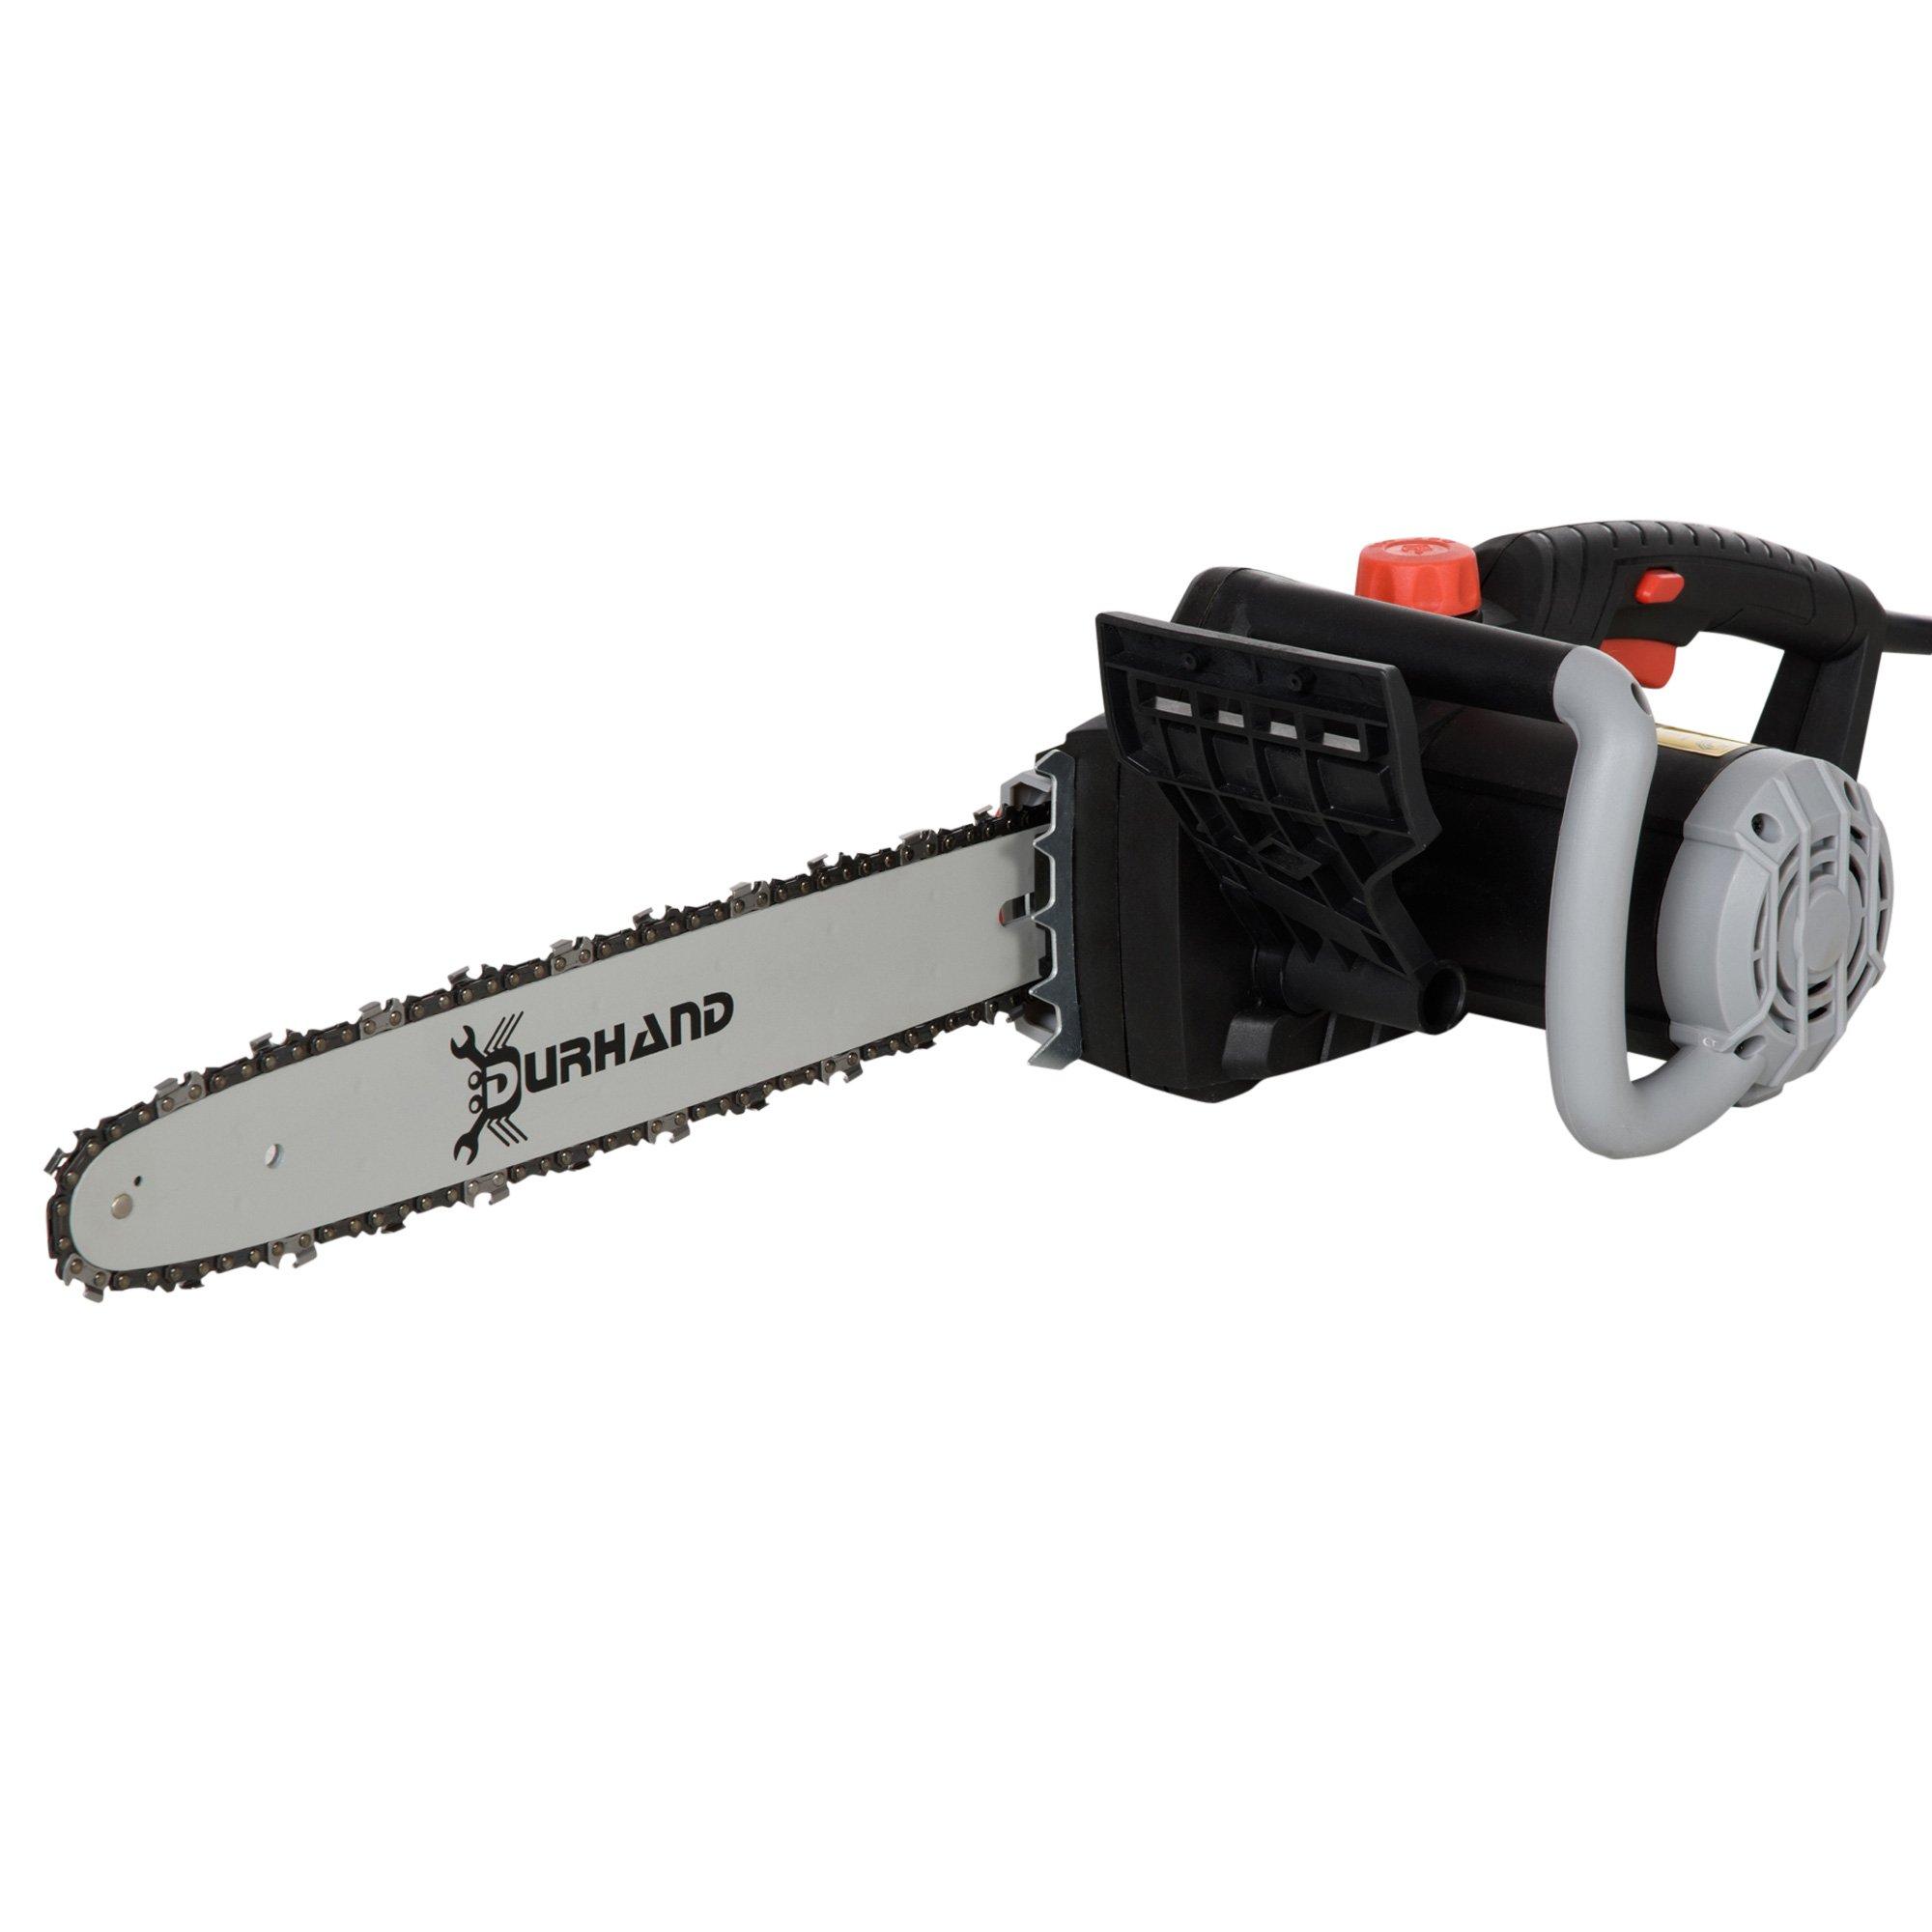 DURHAND 1600W Electric Chainsaw Power Saw with Brake and Lubrication